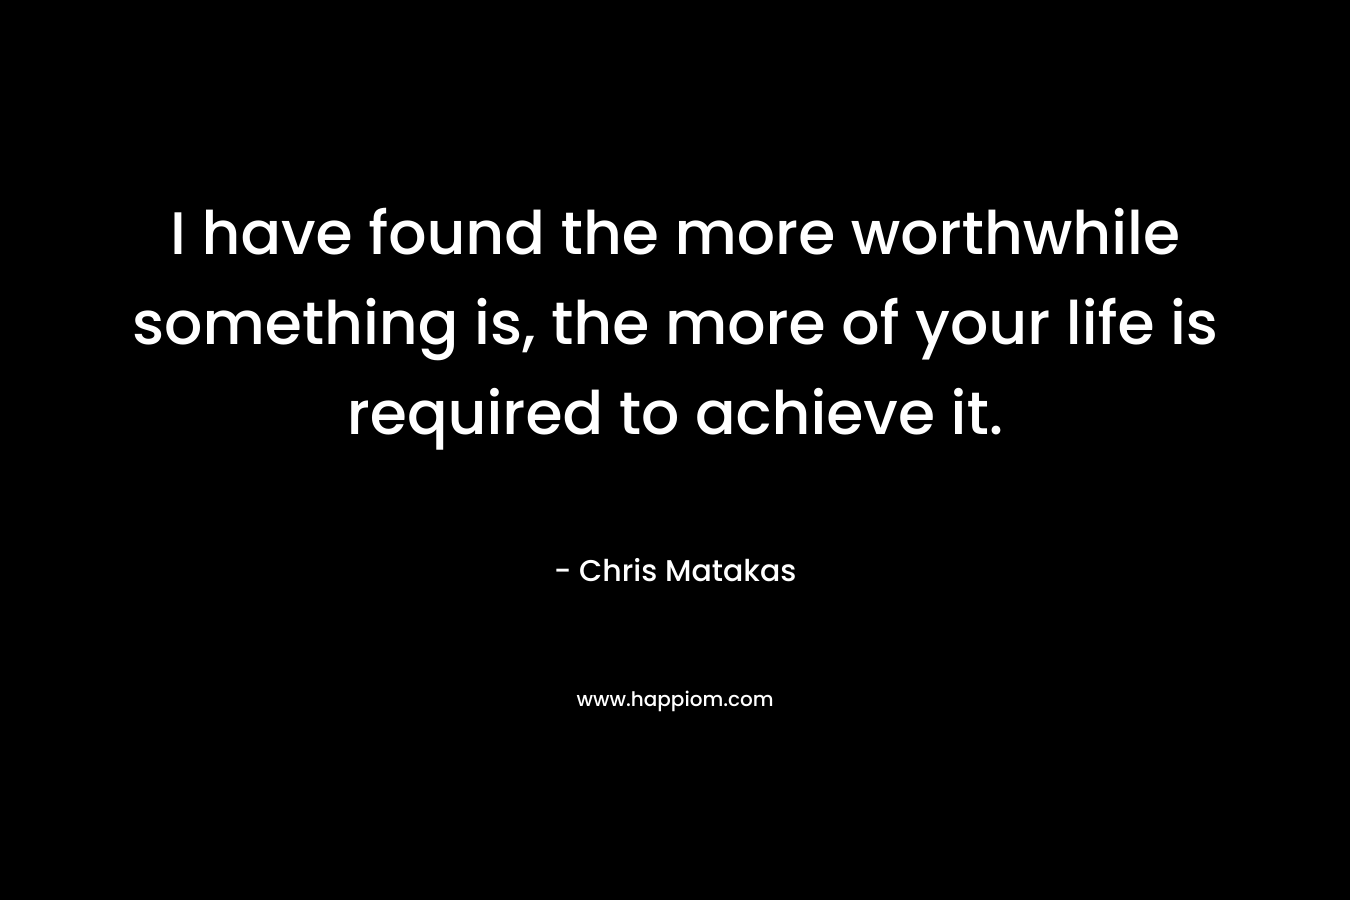 I have found the more worthwhile something is, the more of your life is required to achieve it.